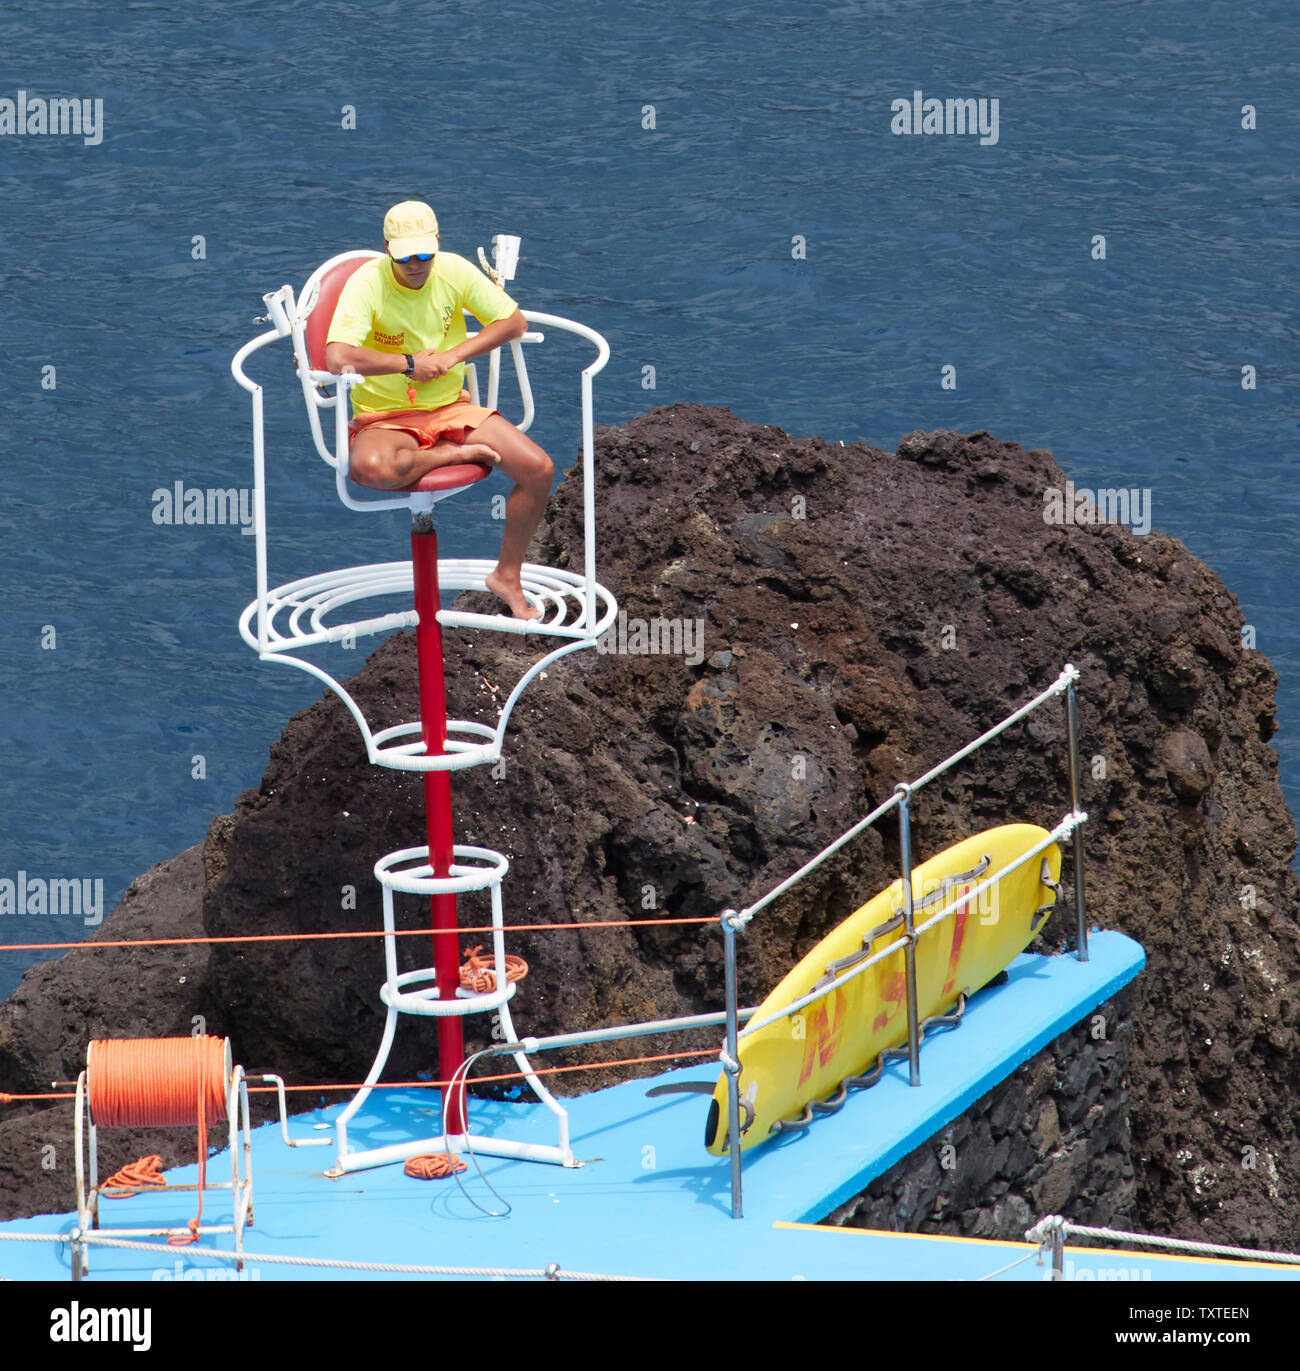 Lifeguard in yellow top along the Frente Mar area of Funchal, madeira, Portugal Stock Photo